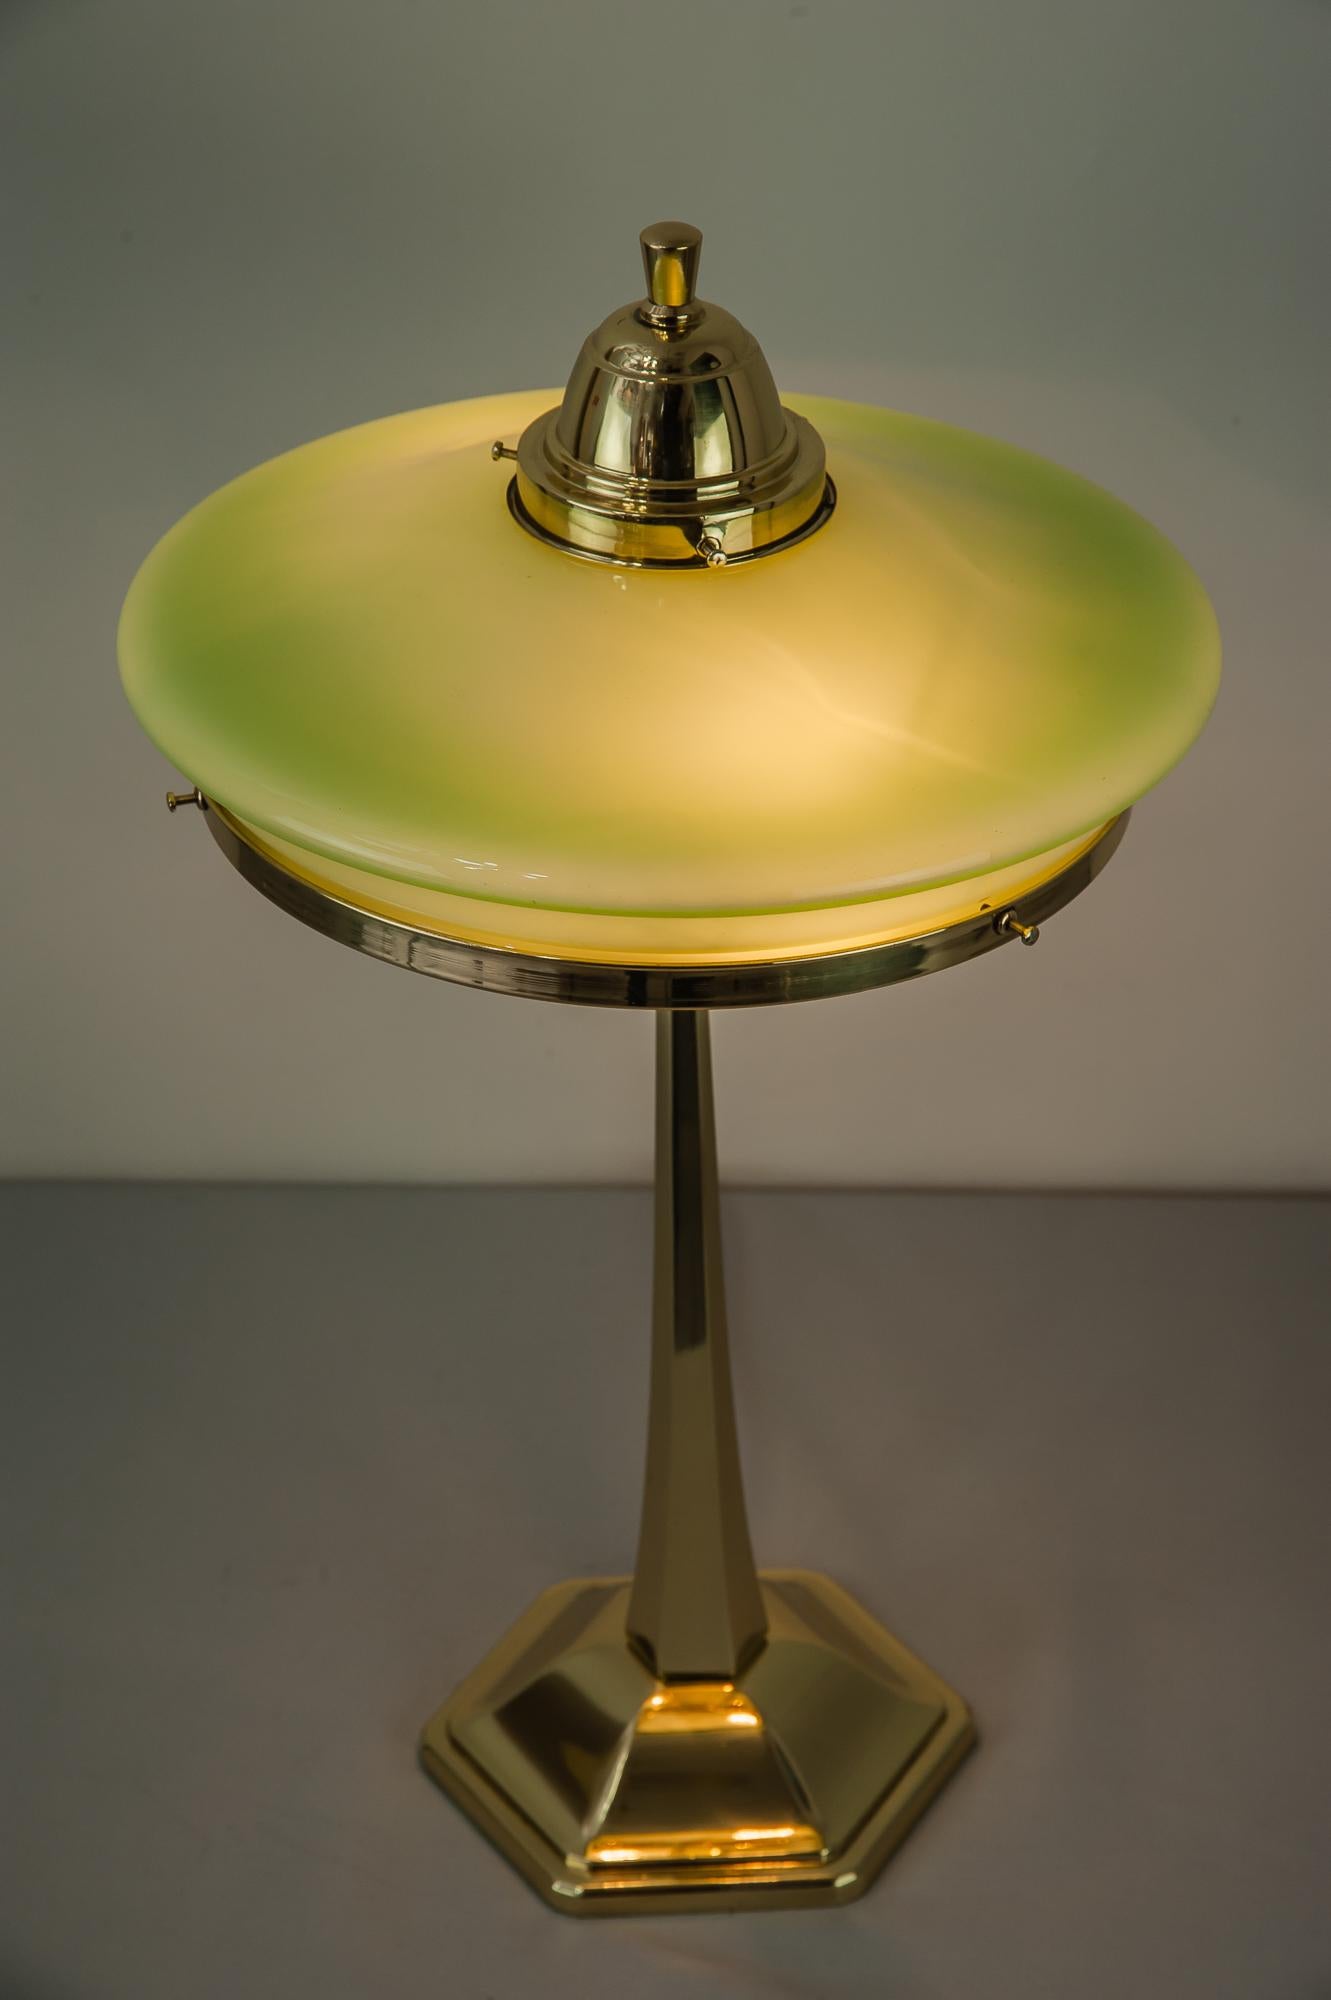 Lacquered Jugendstil Table Lamp circa 1910s with Original Glass